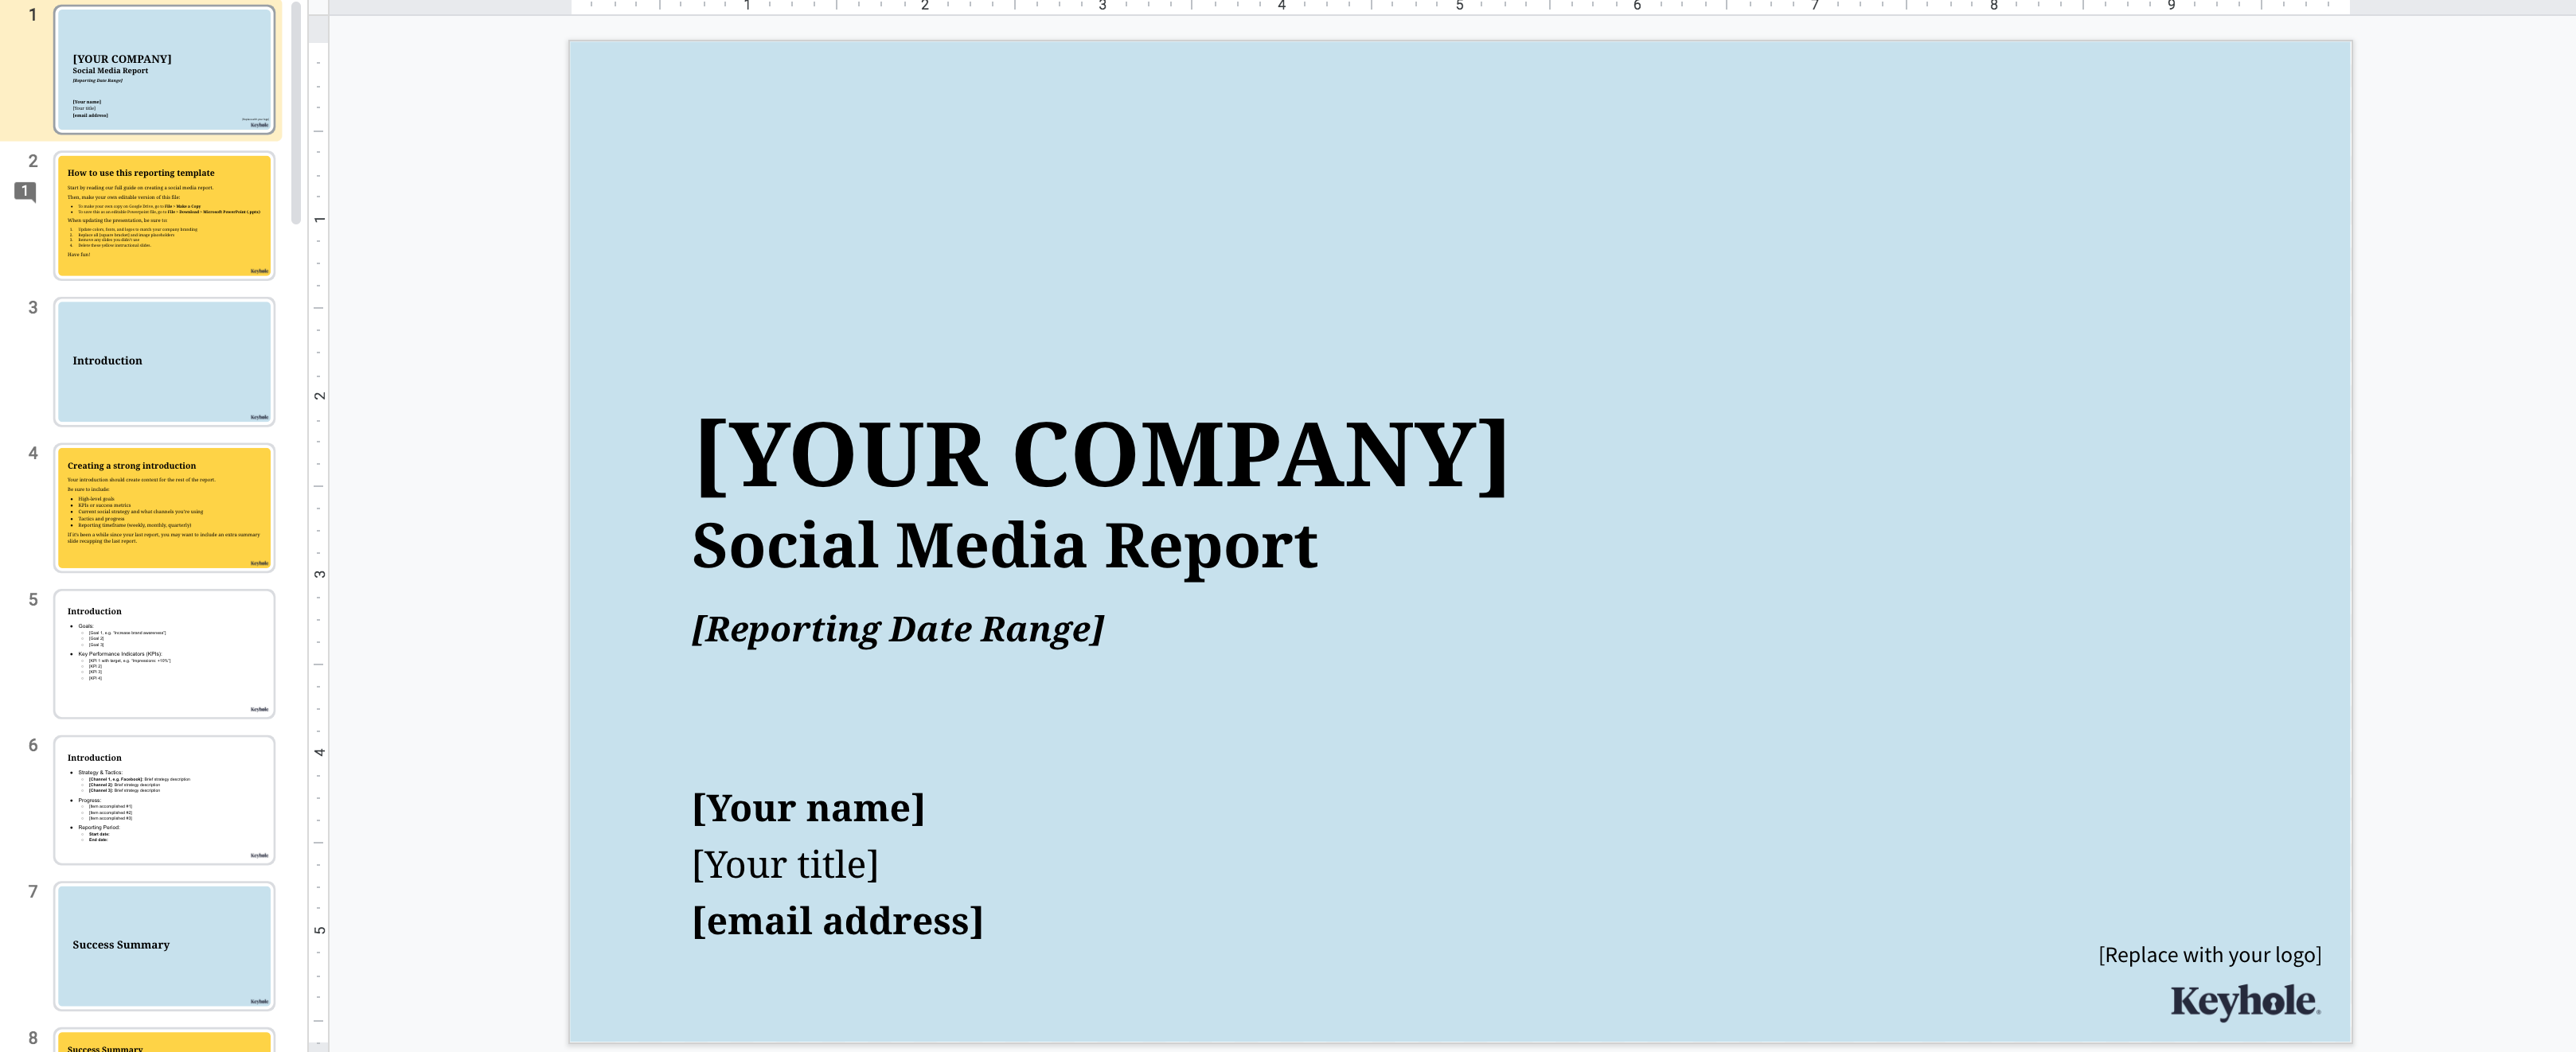 Social Media Reporting Template - Keyhole Within Free Social Media Report Template